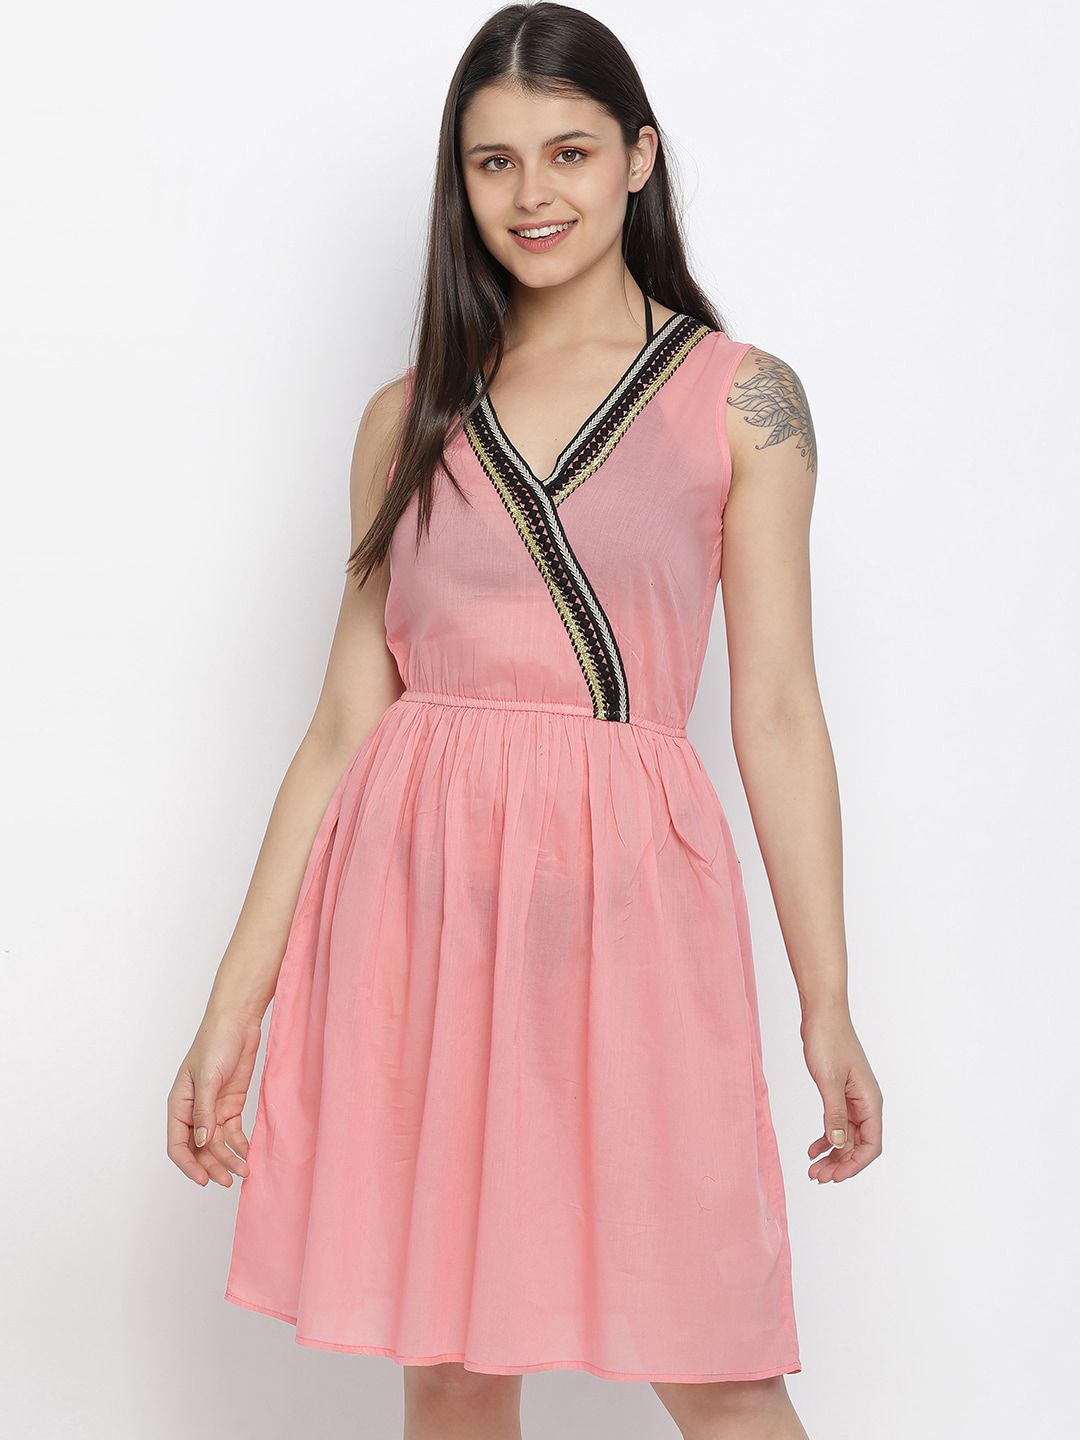 Oxolloxo Women Coral Pink Coloured Cotton Beach Dress Price in India